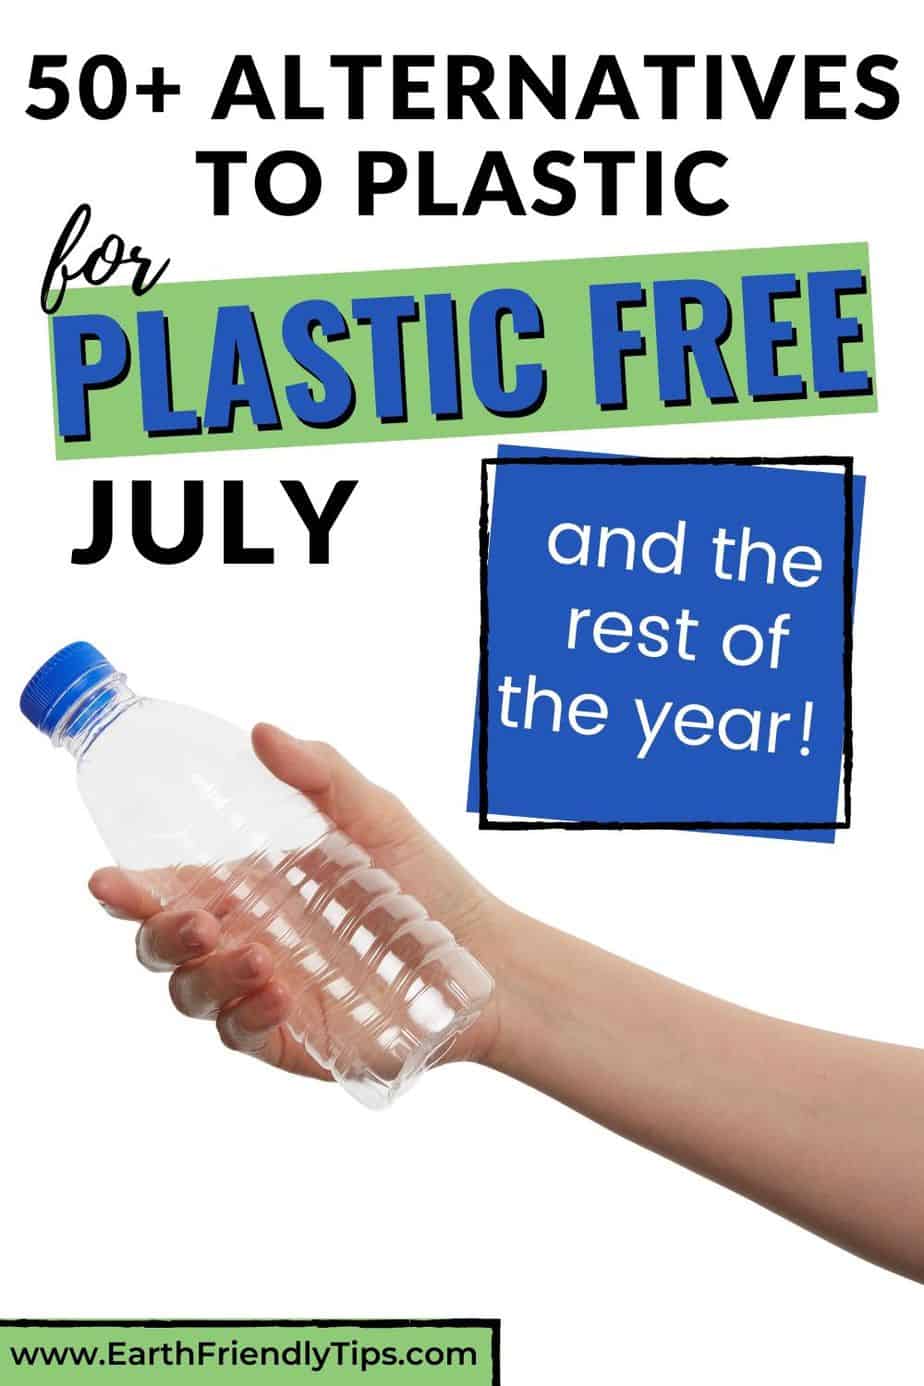 Hand holding plastic bottle text overlay 50+ Alternatives to Plastic for Plastic Free July